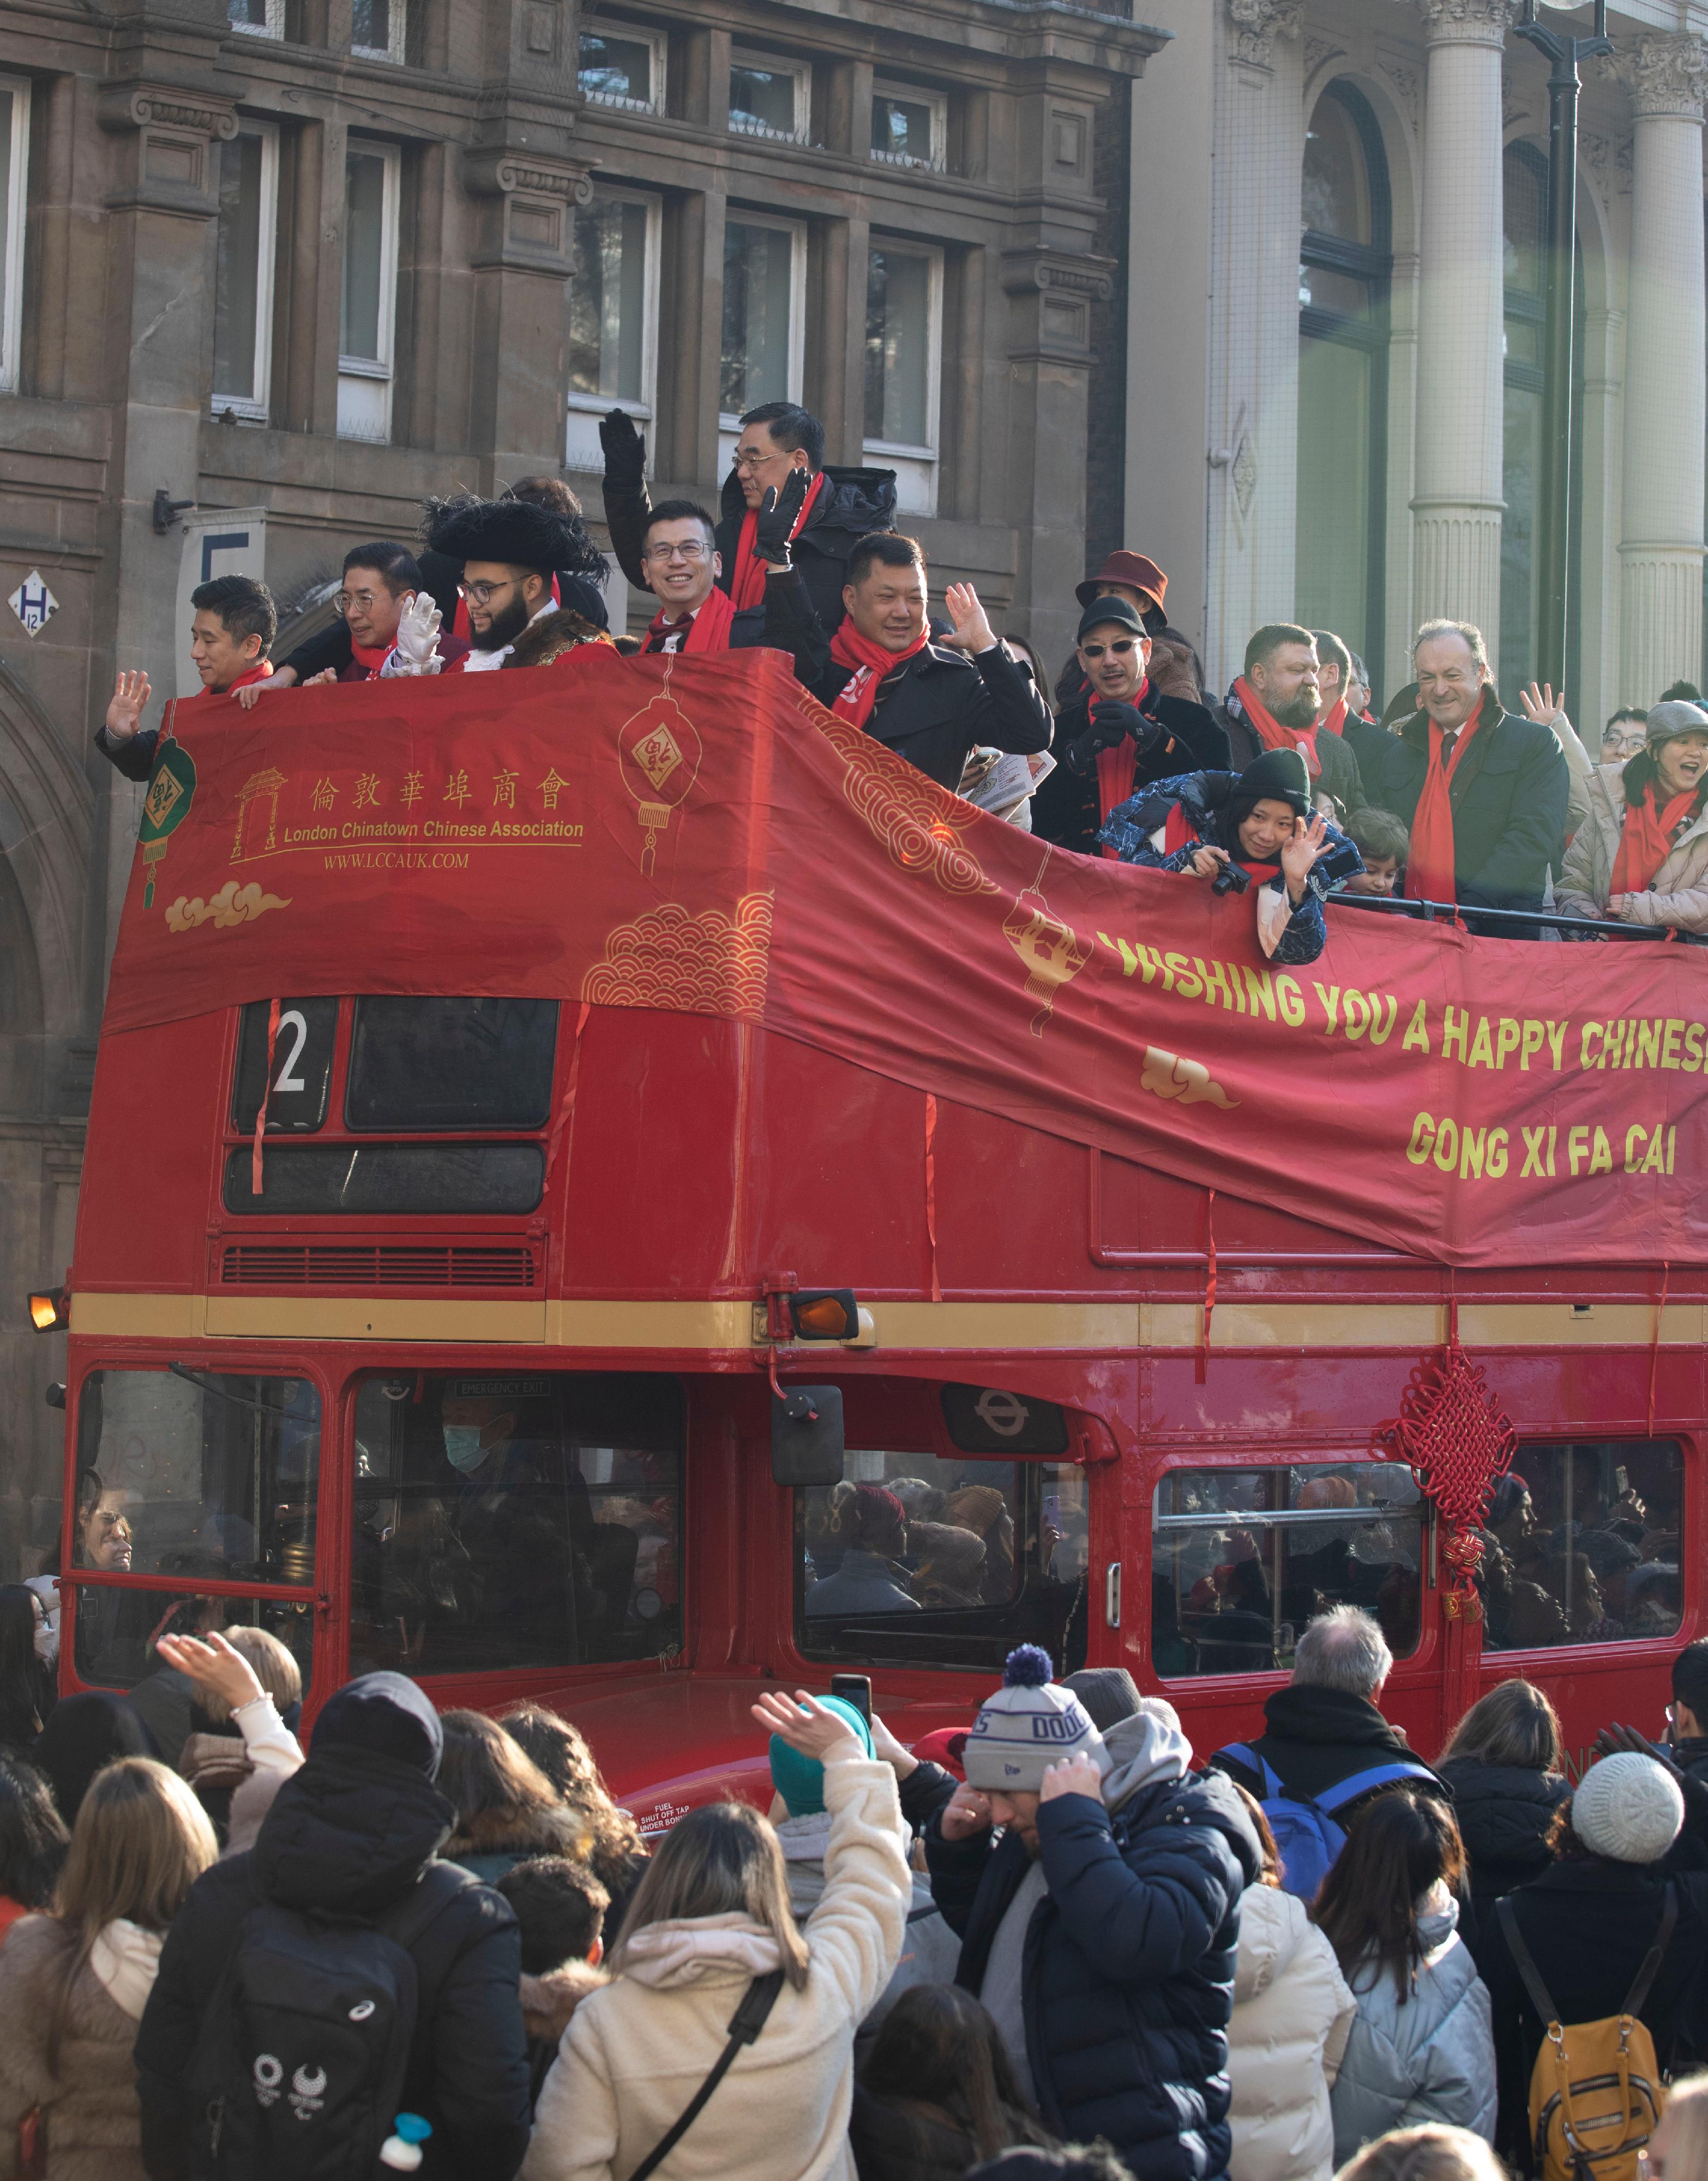 The Hong Kong Economic and Trade Office, London (London ETO) participated in a large-scale London Chinatown celebration in Trafalgar Square, Chinatown and Charing Cross Road on January 22 (London time). Photo shows the Director-General of the London ETO, Mr Gilford Law (fourth left), greeting the crowd in London from an open-air double decker bus in the celebration parade.